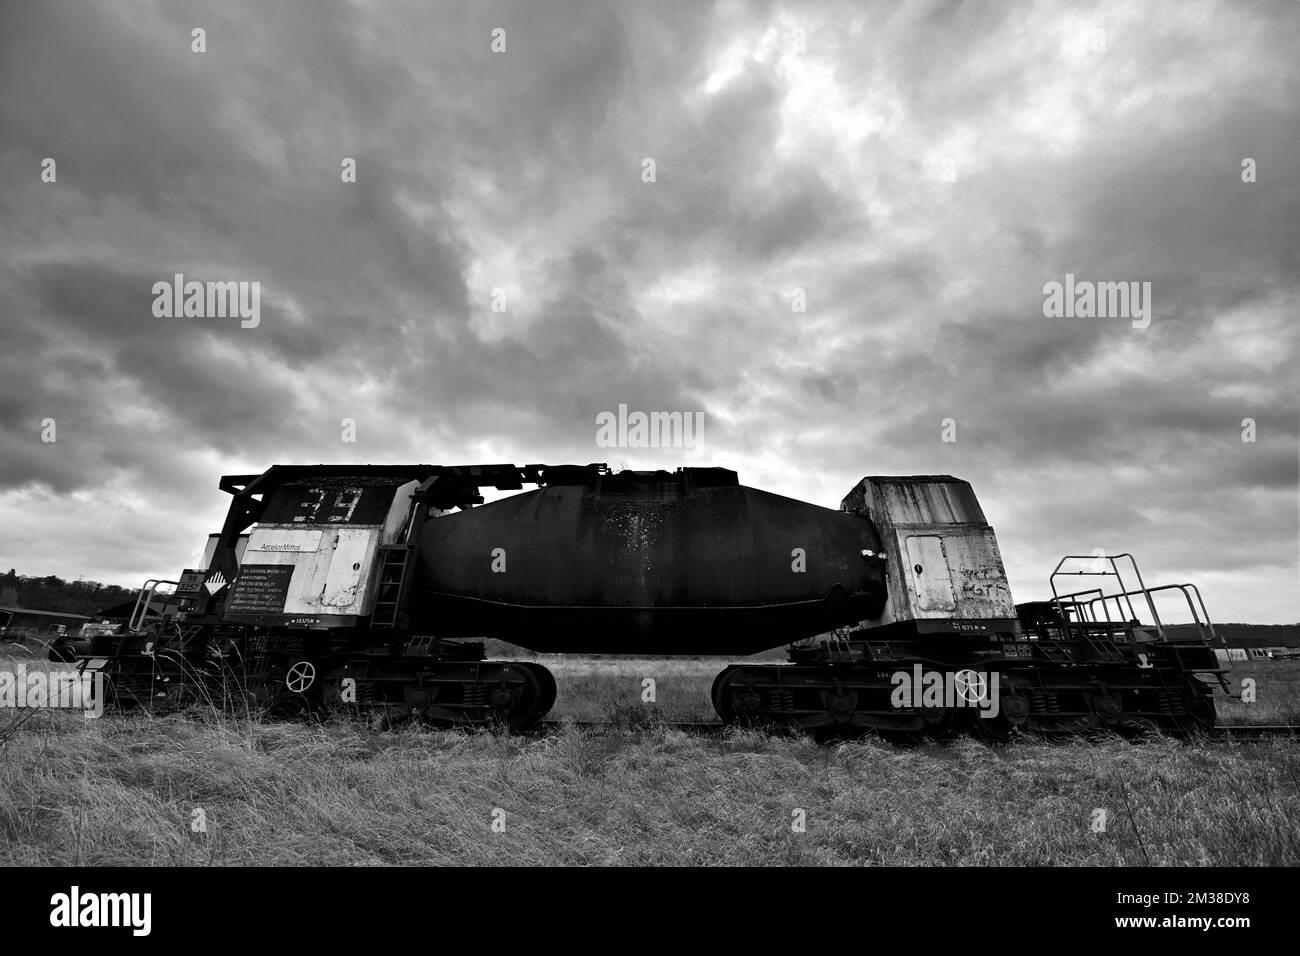 Illustration picture shows a torpedo wagon during a press visit to demolition works on the disused industrial site of ArcelorMittal in Chertal, Oupeye, Friday 18 February 2022. Last summer, the competent ministers granted combined permits for the demolition of above-ground installations on the sites of, among others, Chertal (Oupeye/Herstal). The demolition works cover 131 of the 180 hectares in Chertal. This process of deconstruction is necessary for the continuation of environmental studies that will subsequently allow the remediation of the soil of these sites. The materials and waste gener Stock Photo